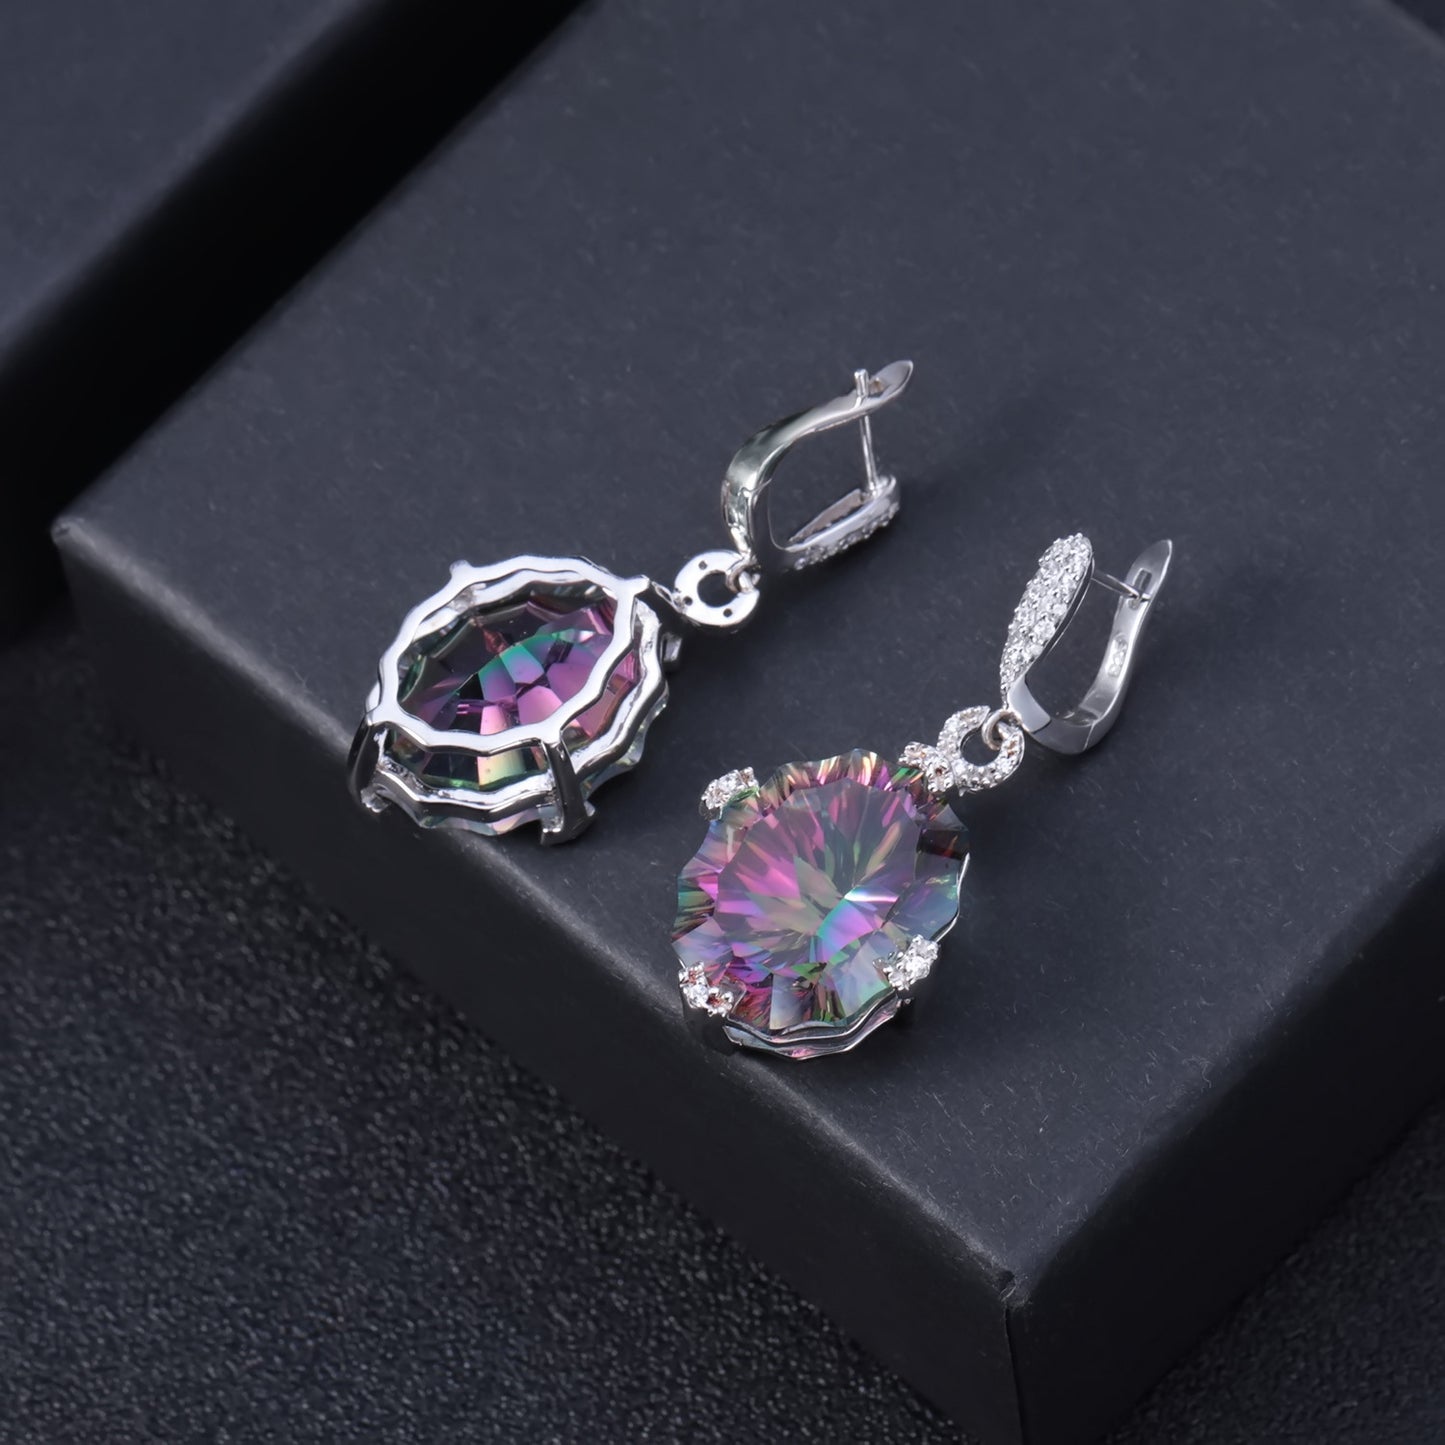 Crystal Special Oval Shaped Silver Drop Earrings for Women